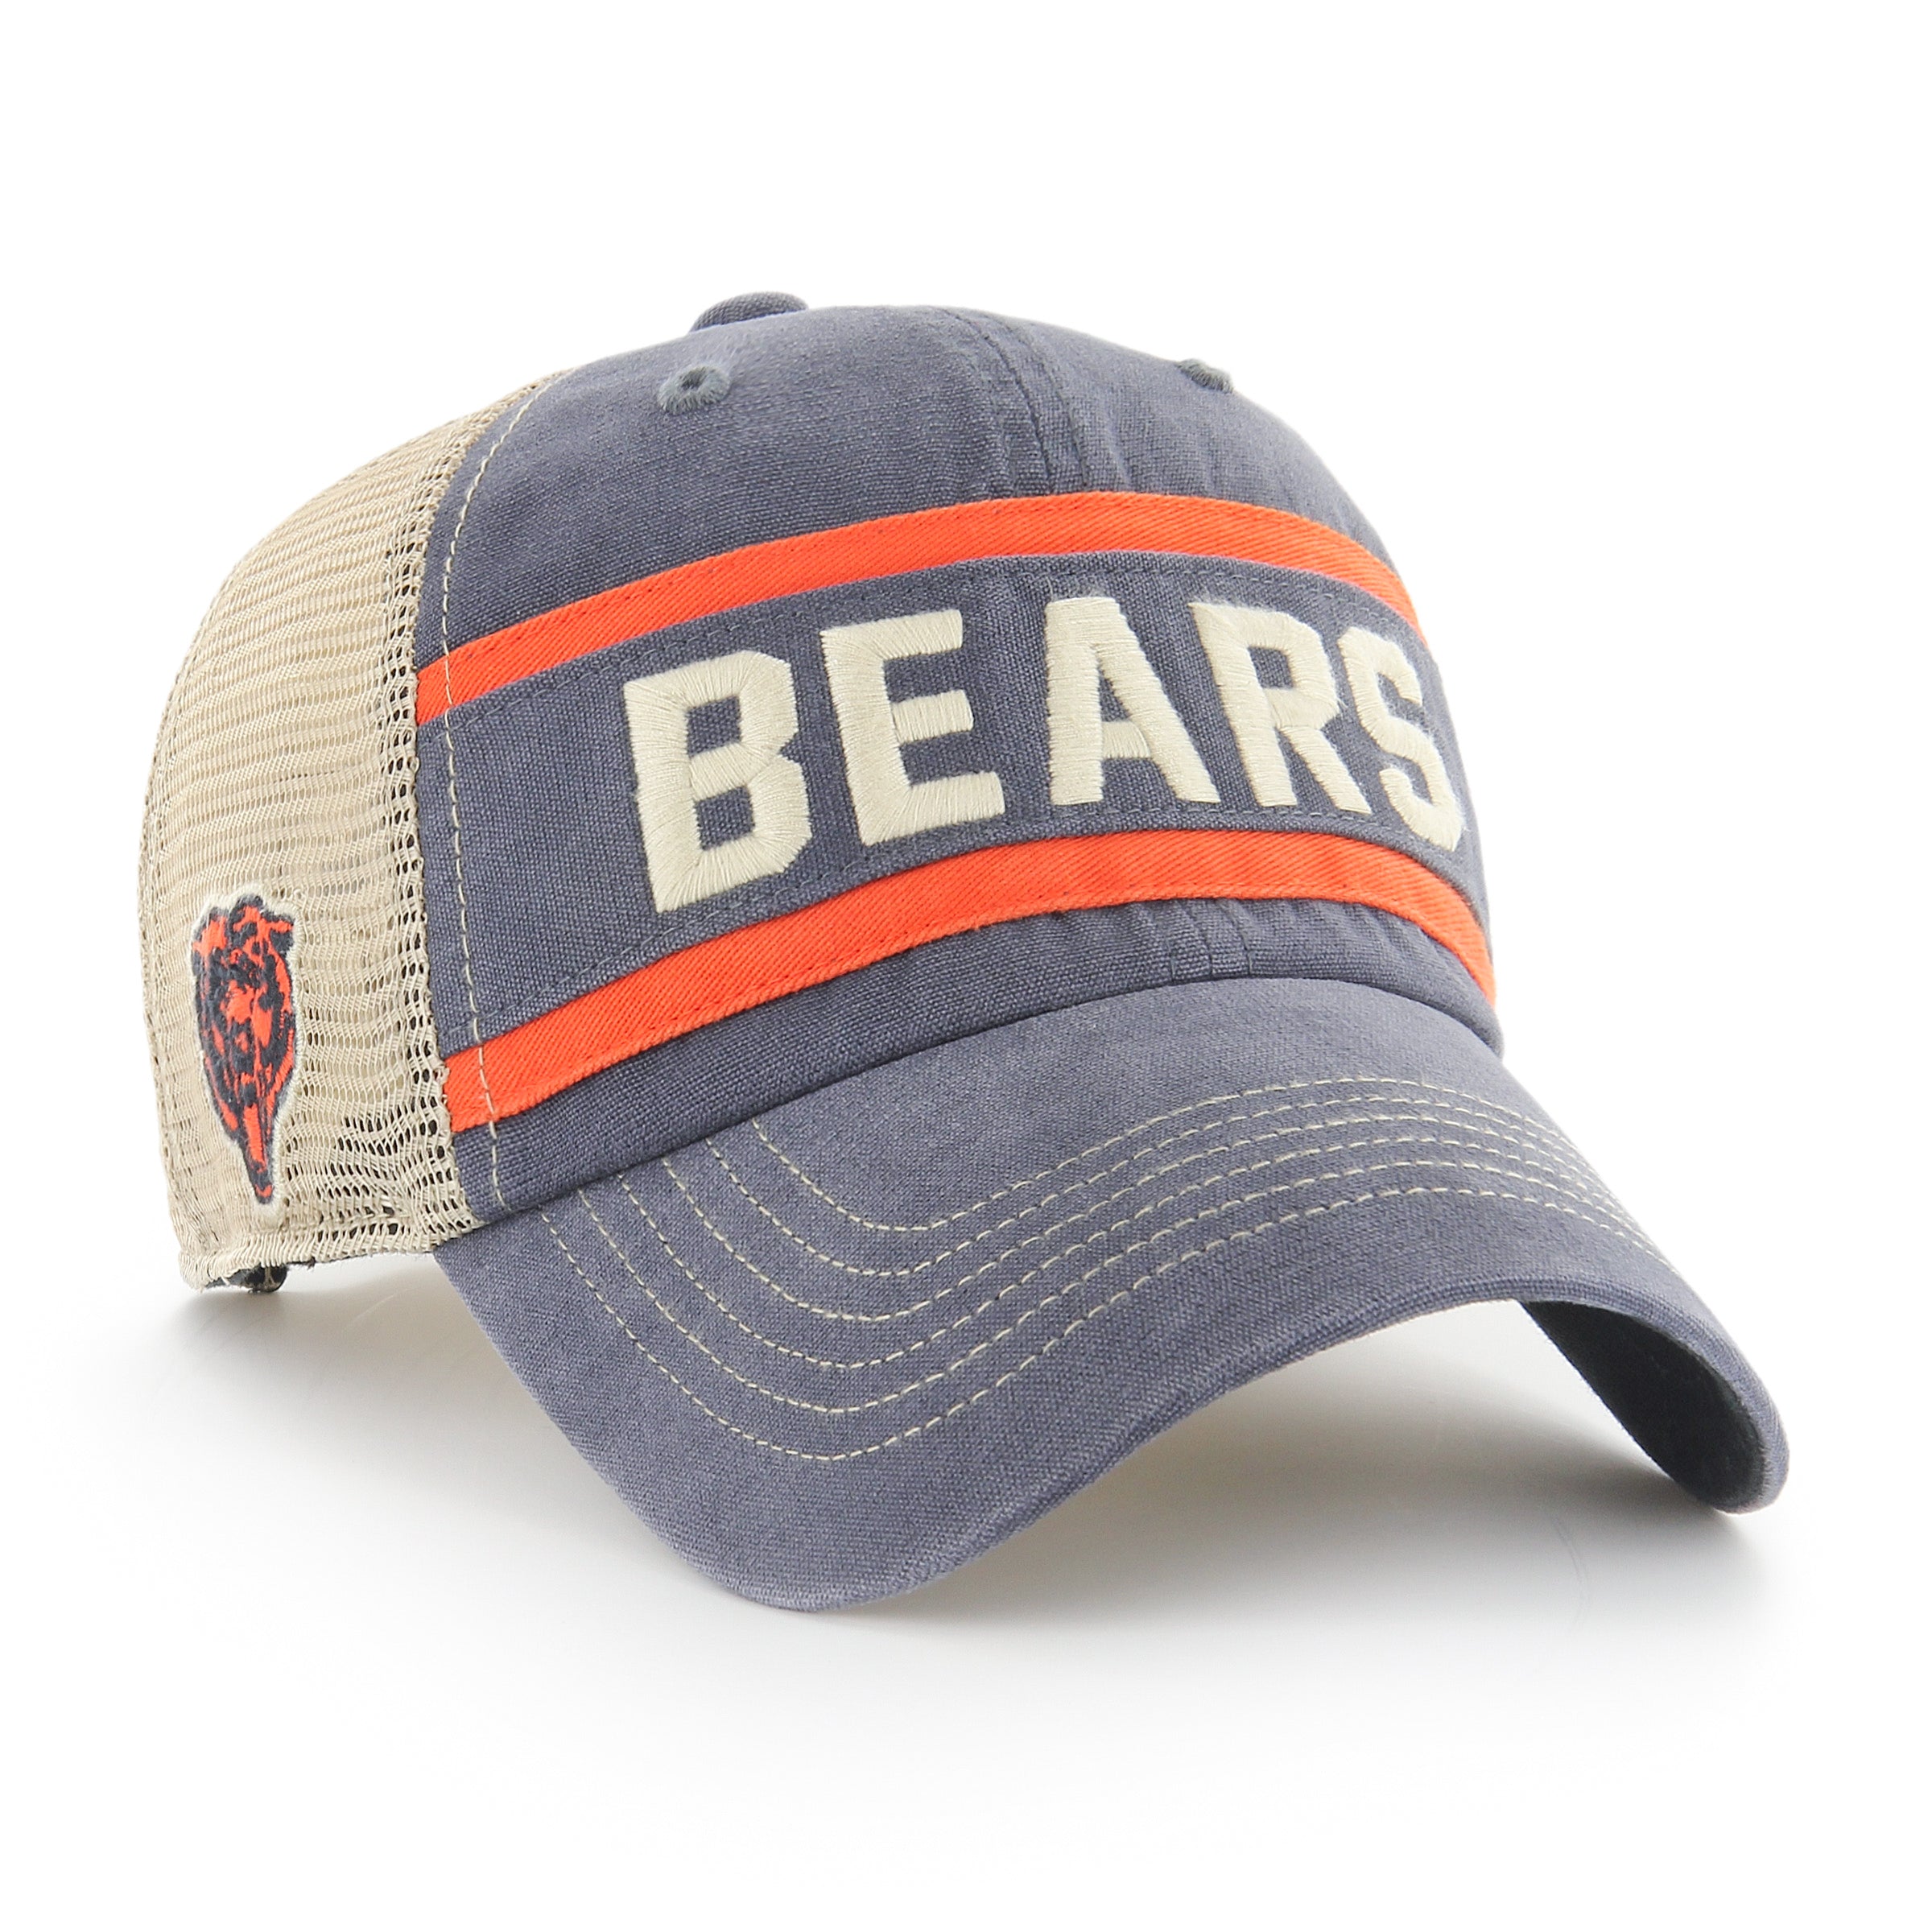 Bears Hat - Real Tree - 47 Brand - Adjustable Size - sporting